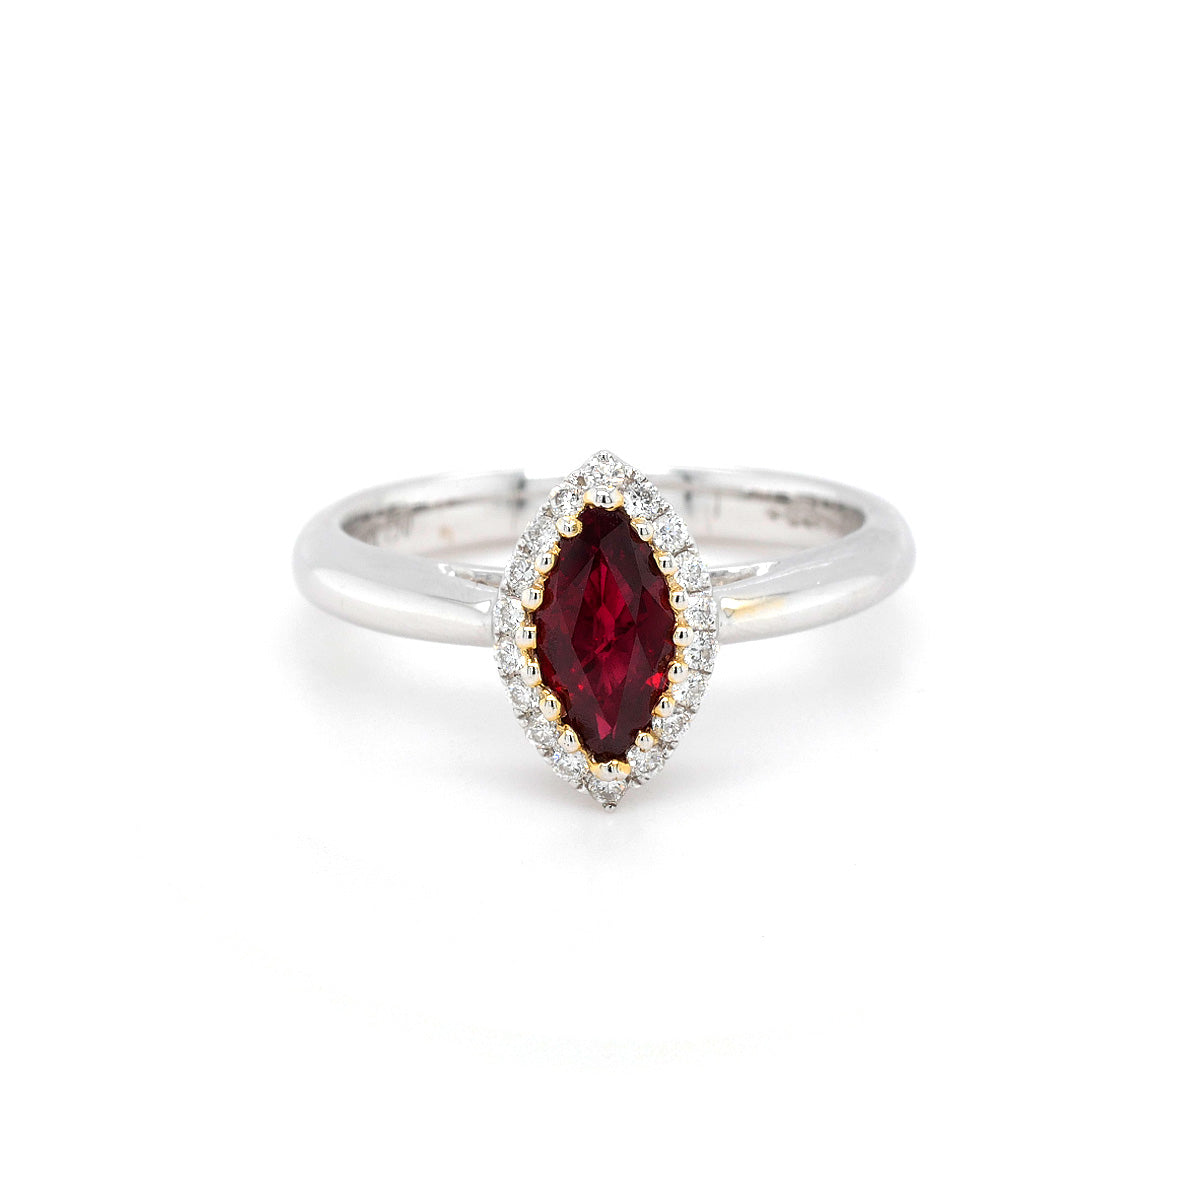 18ct White Gold Marquise Cut Ruby & Diamond Ring - Size M